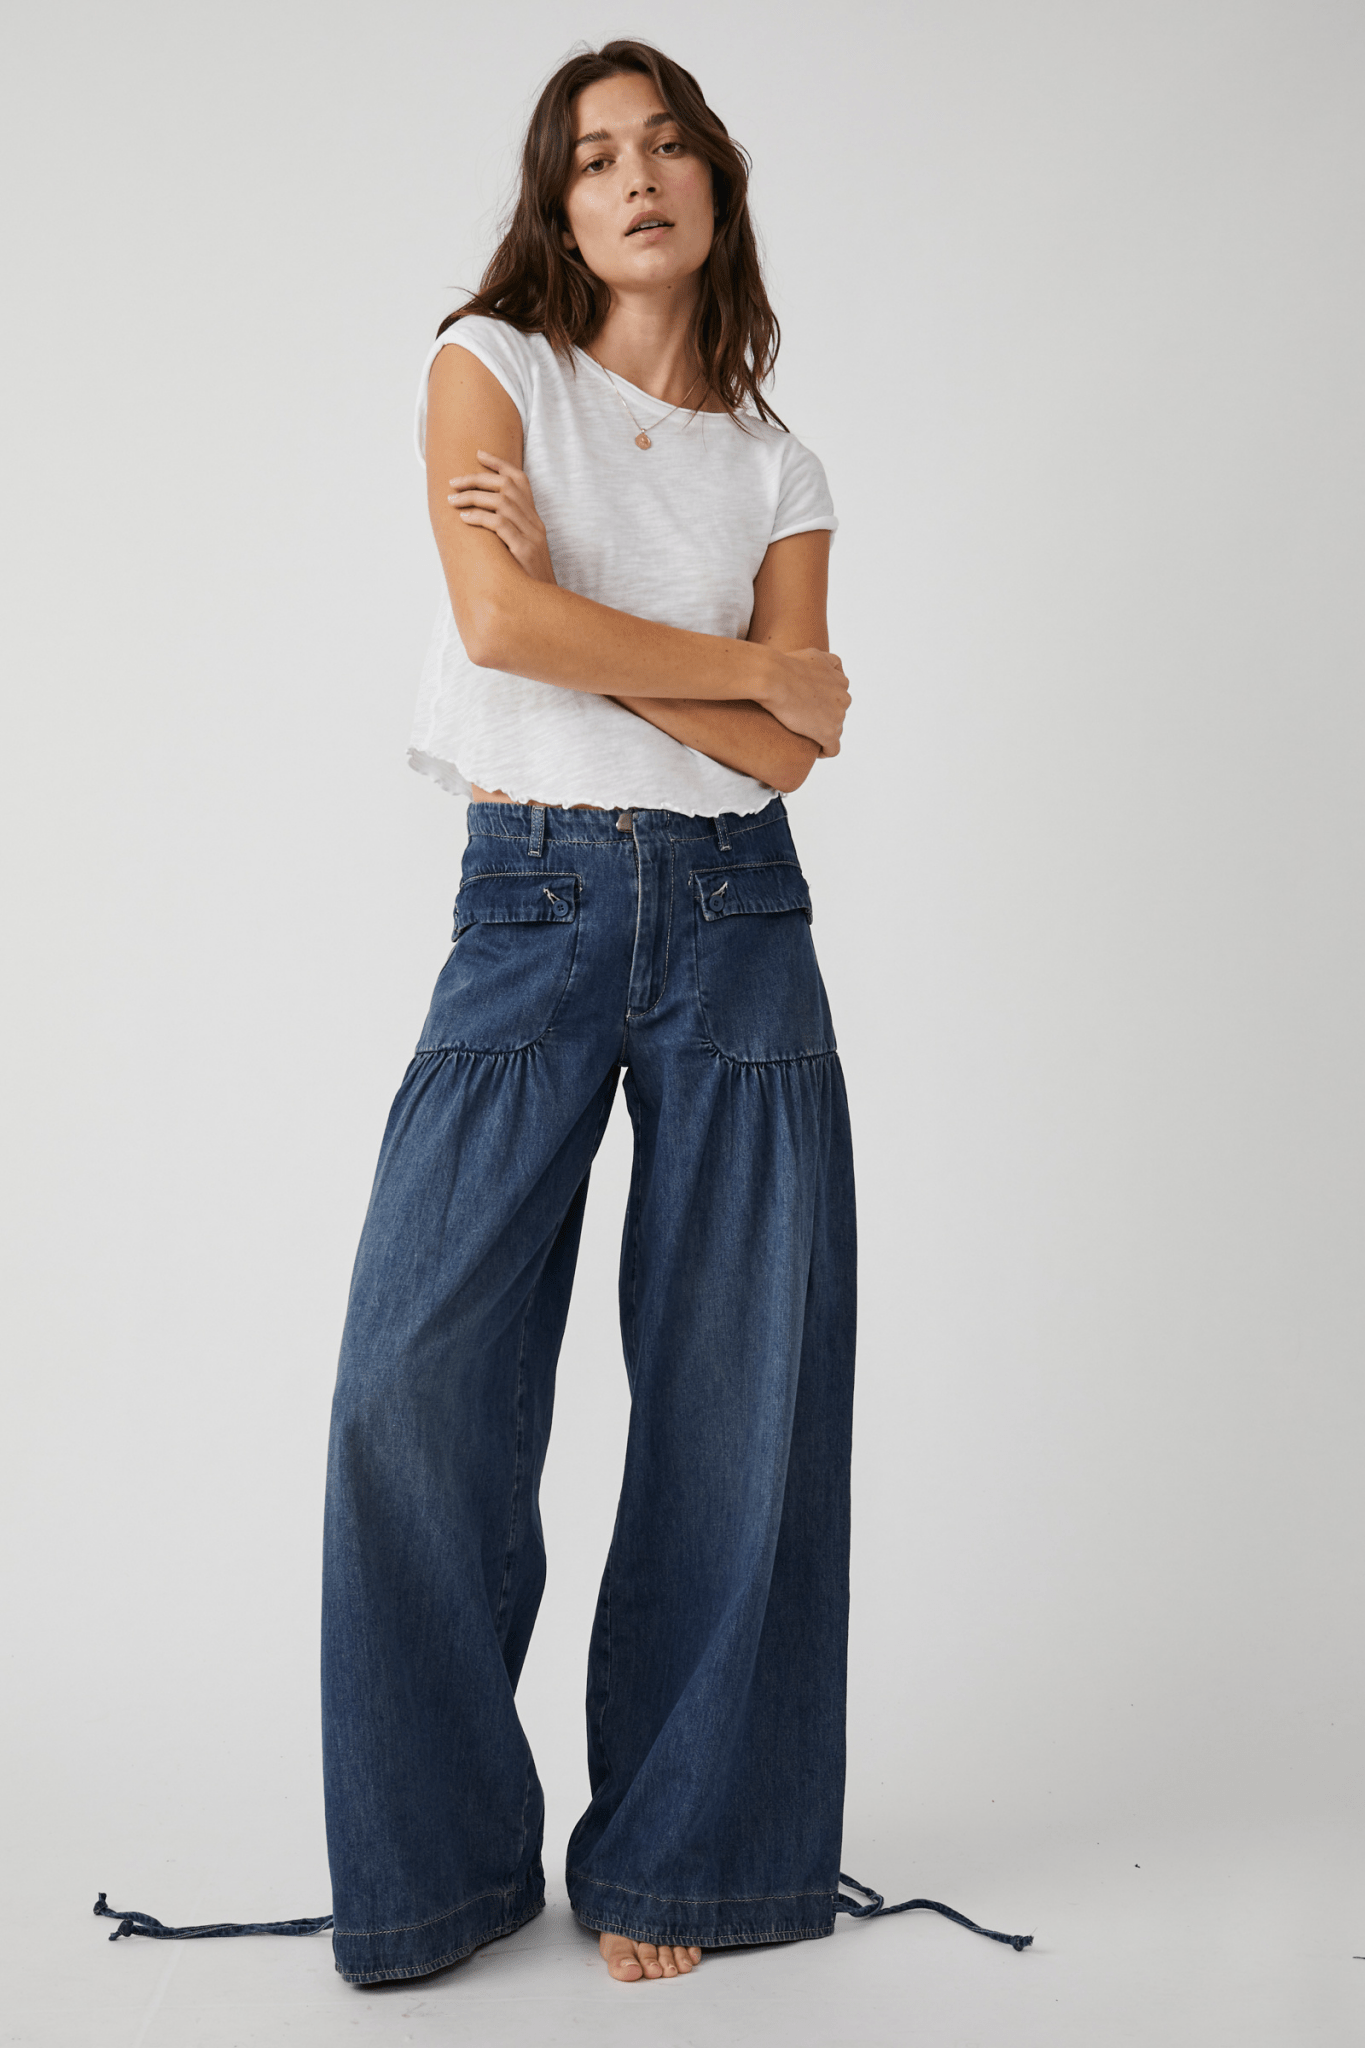 Lotus Jeans by Free People - Blue Sky Fashions & Lingerie